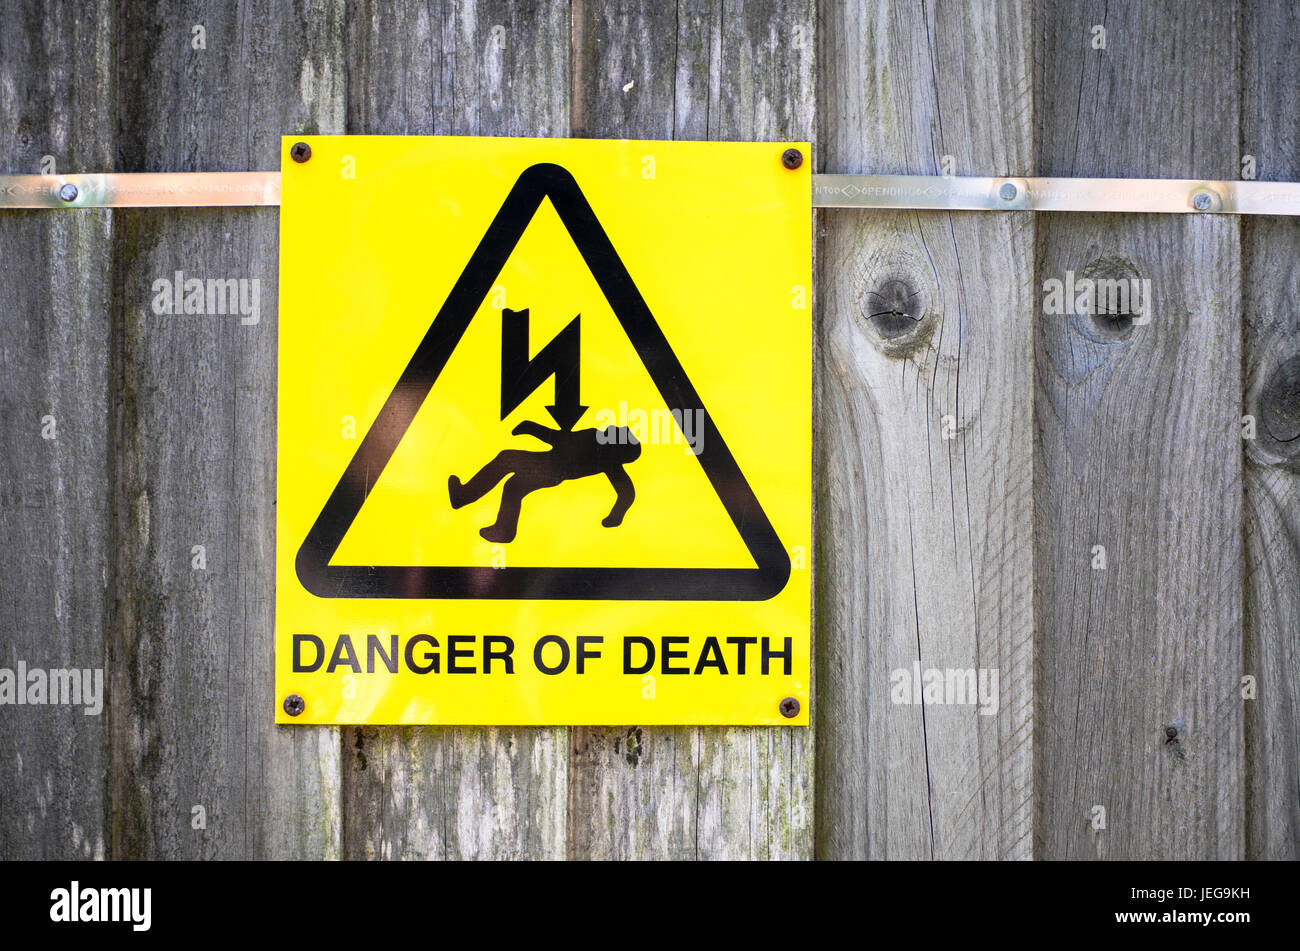 Danger of death sign Stock Photo